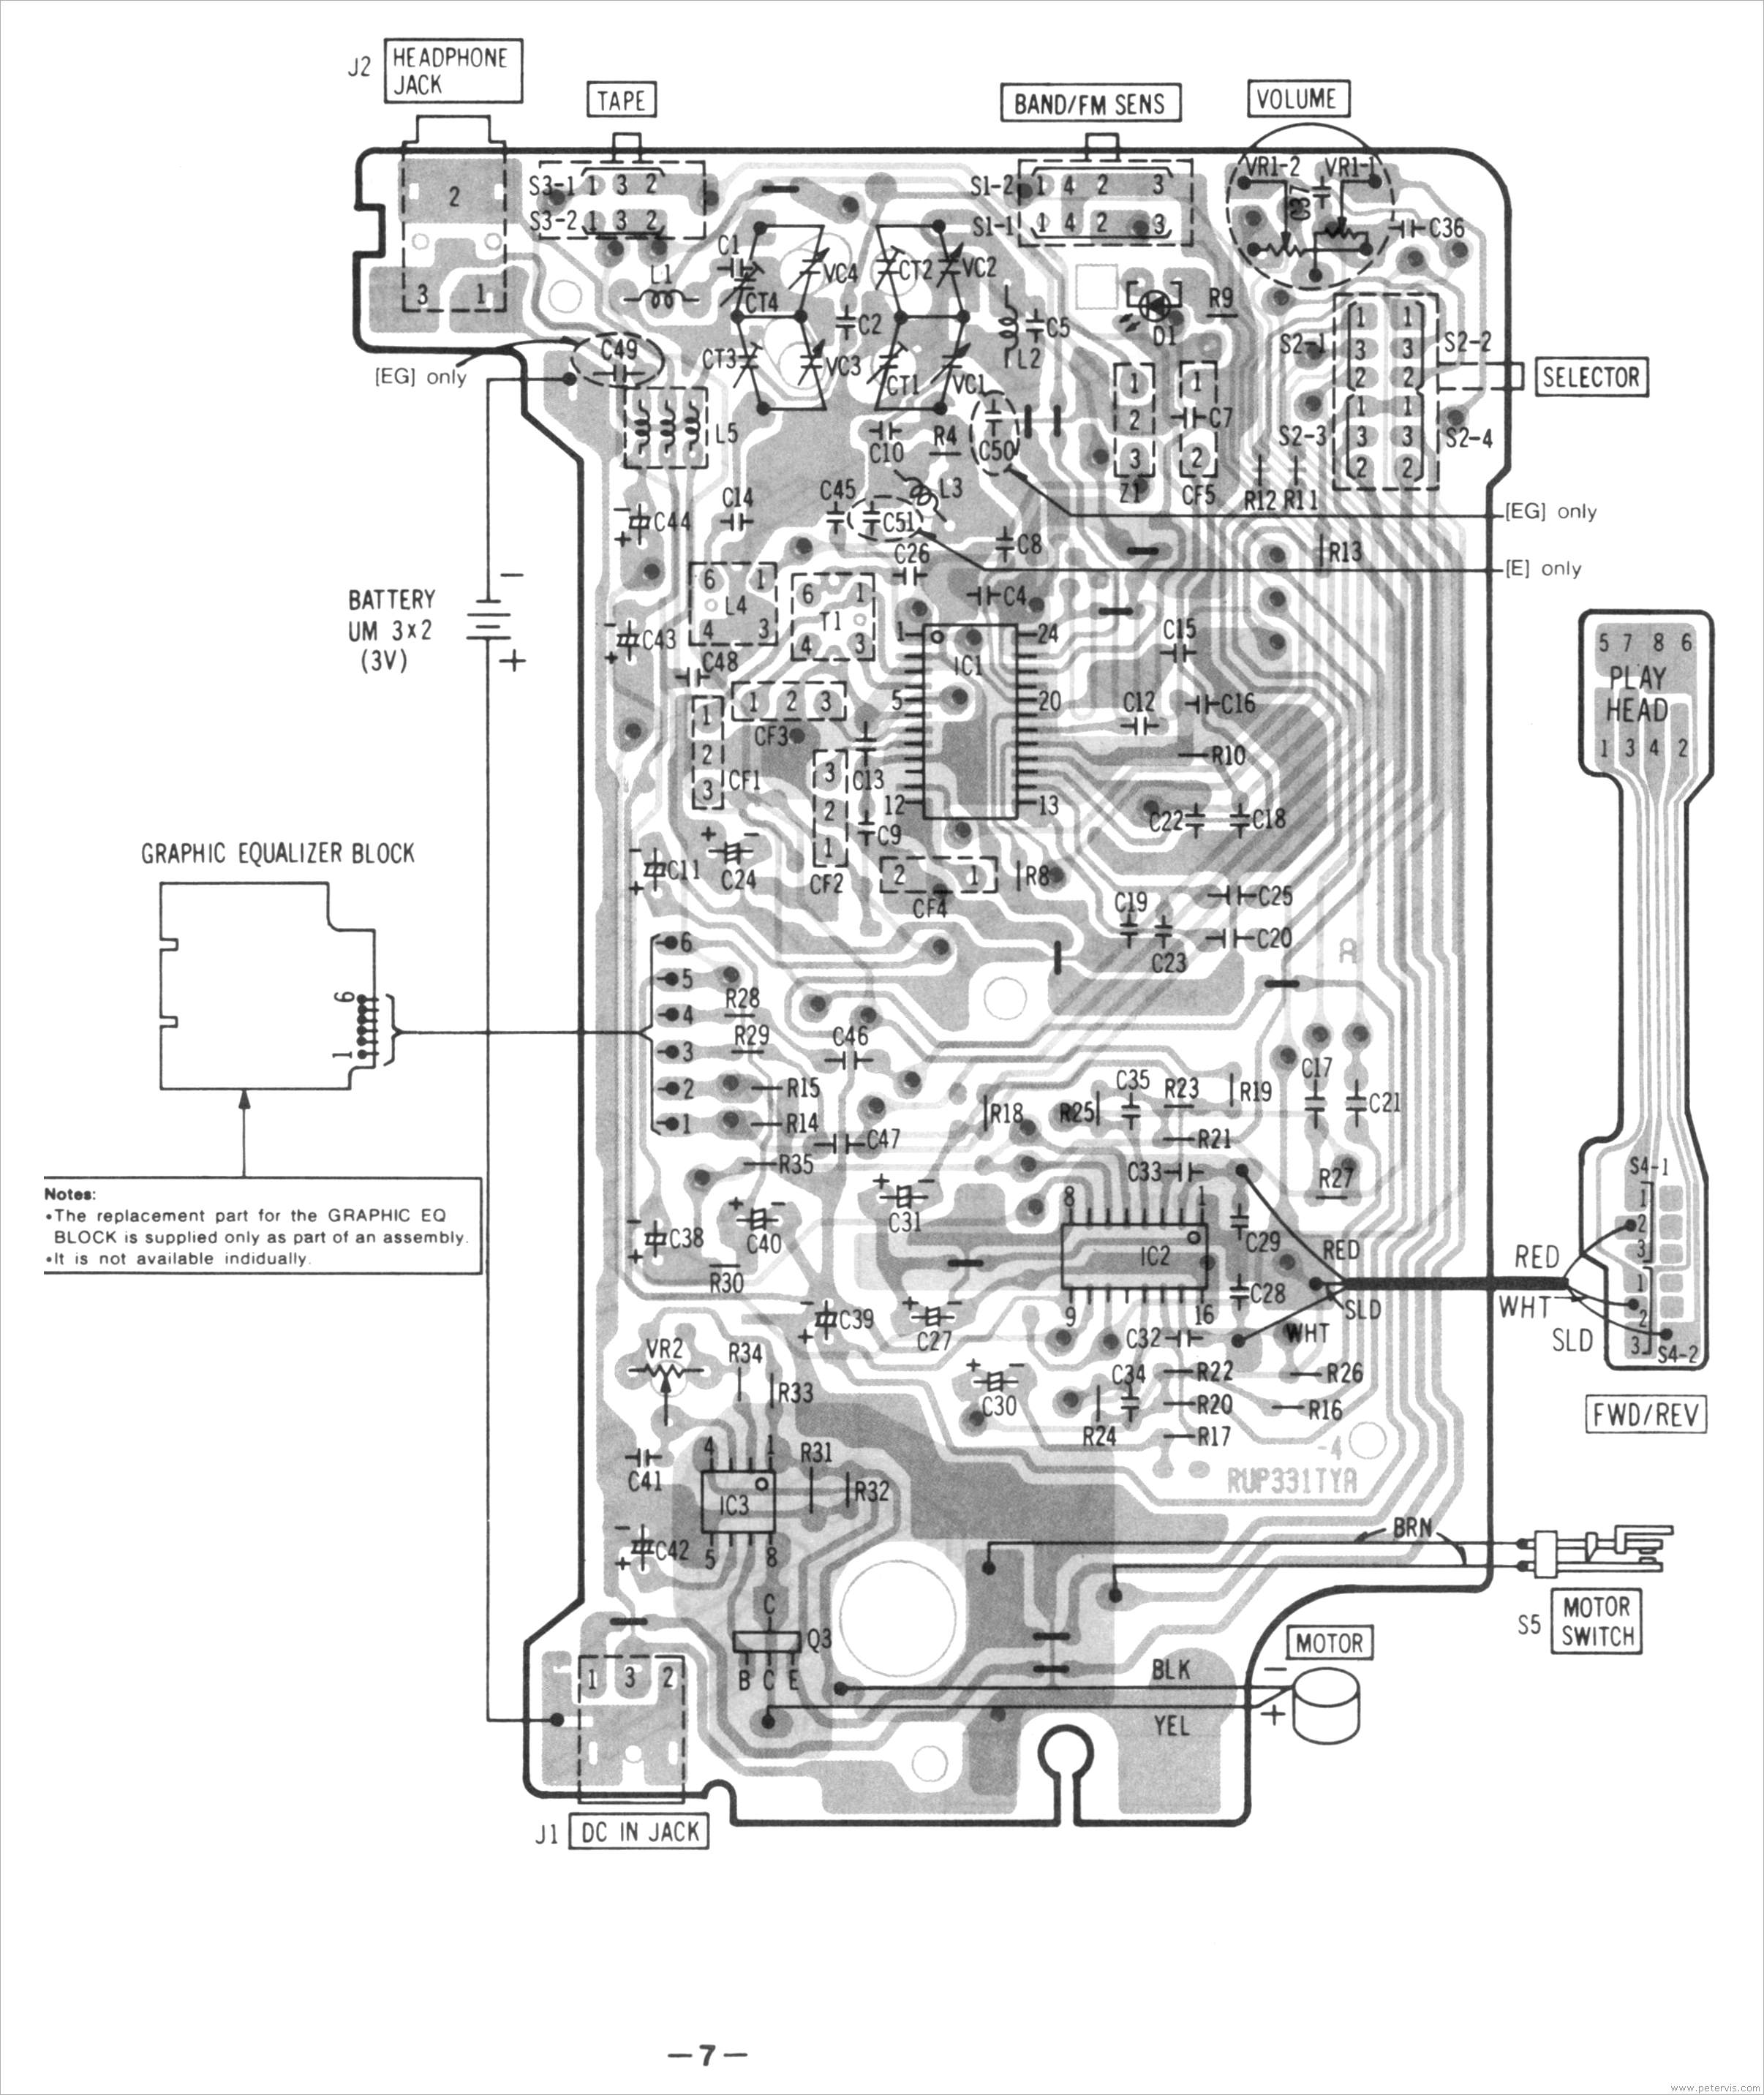 PCB AND WIRING